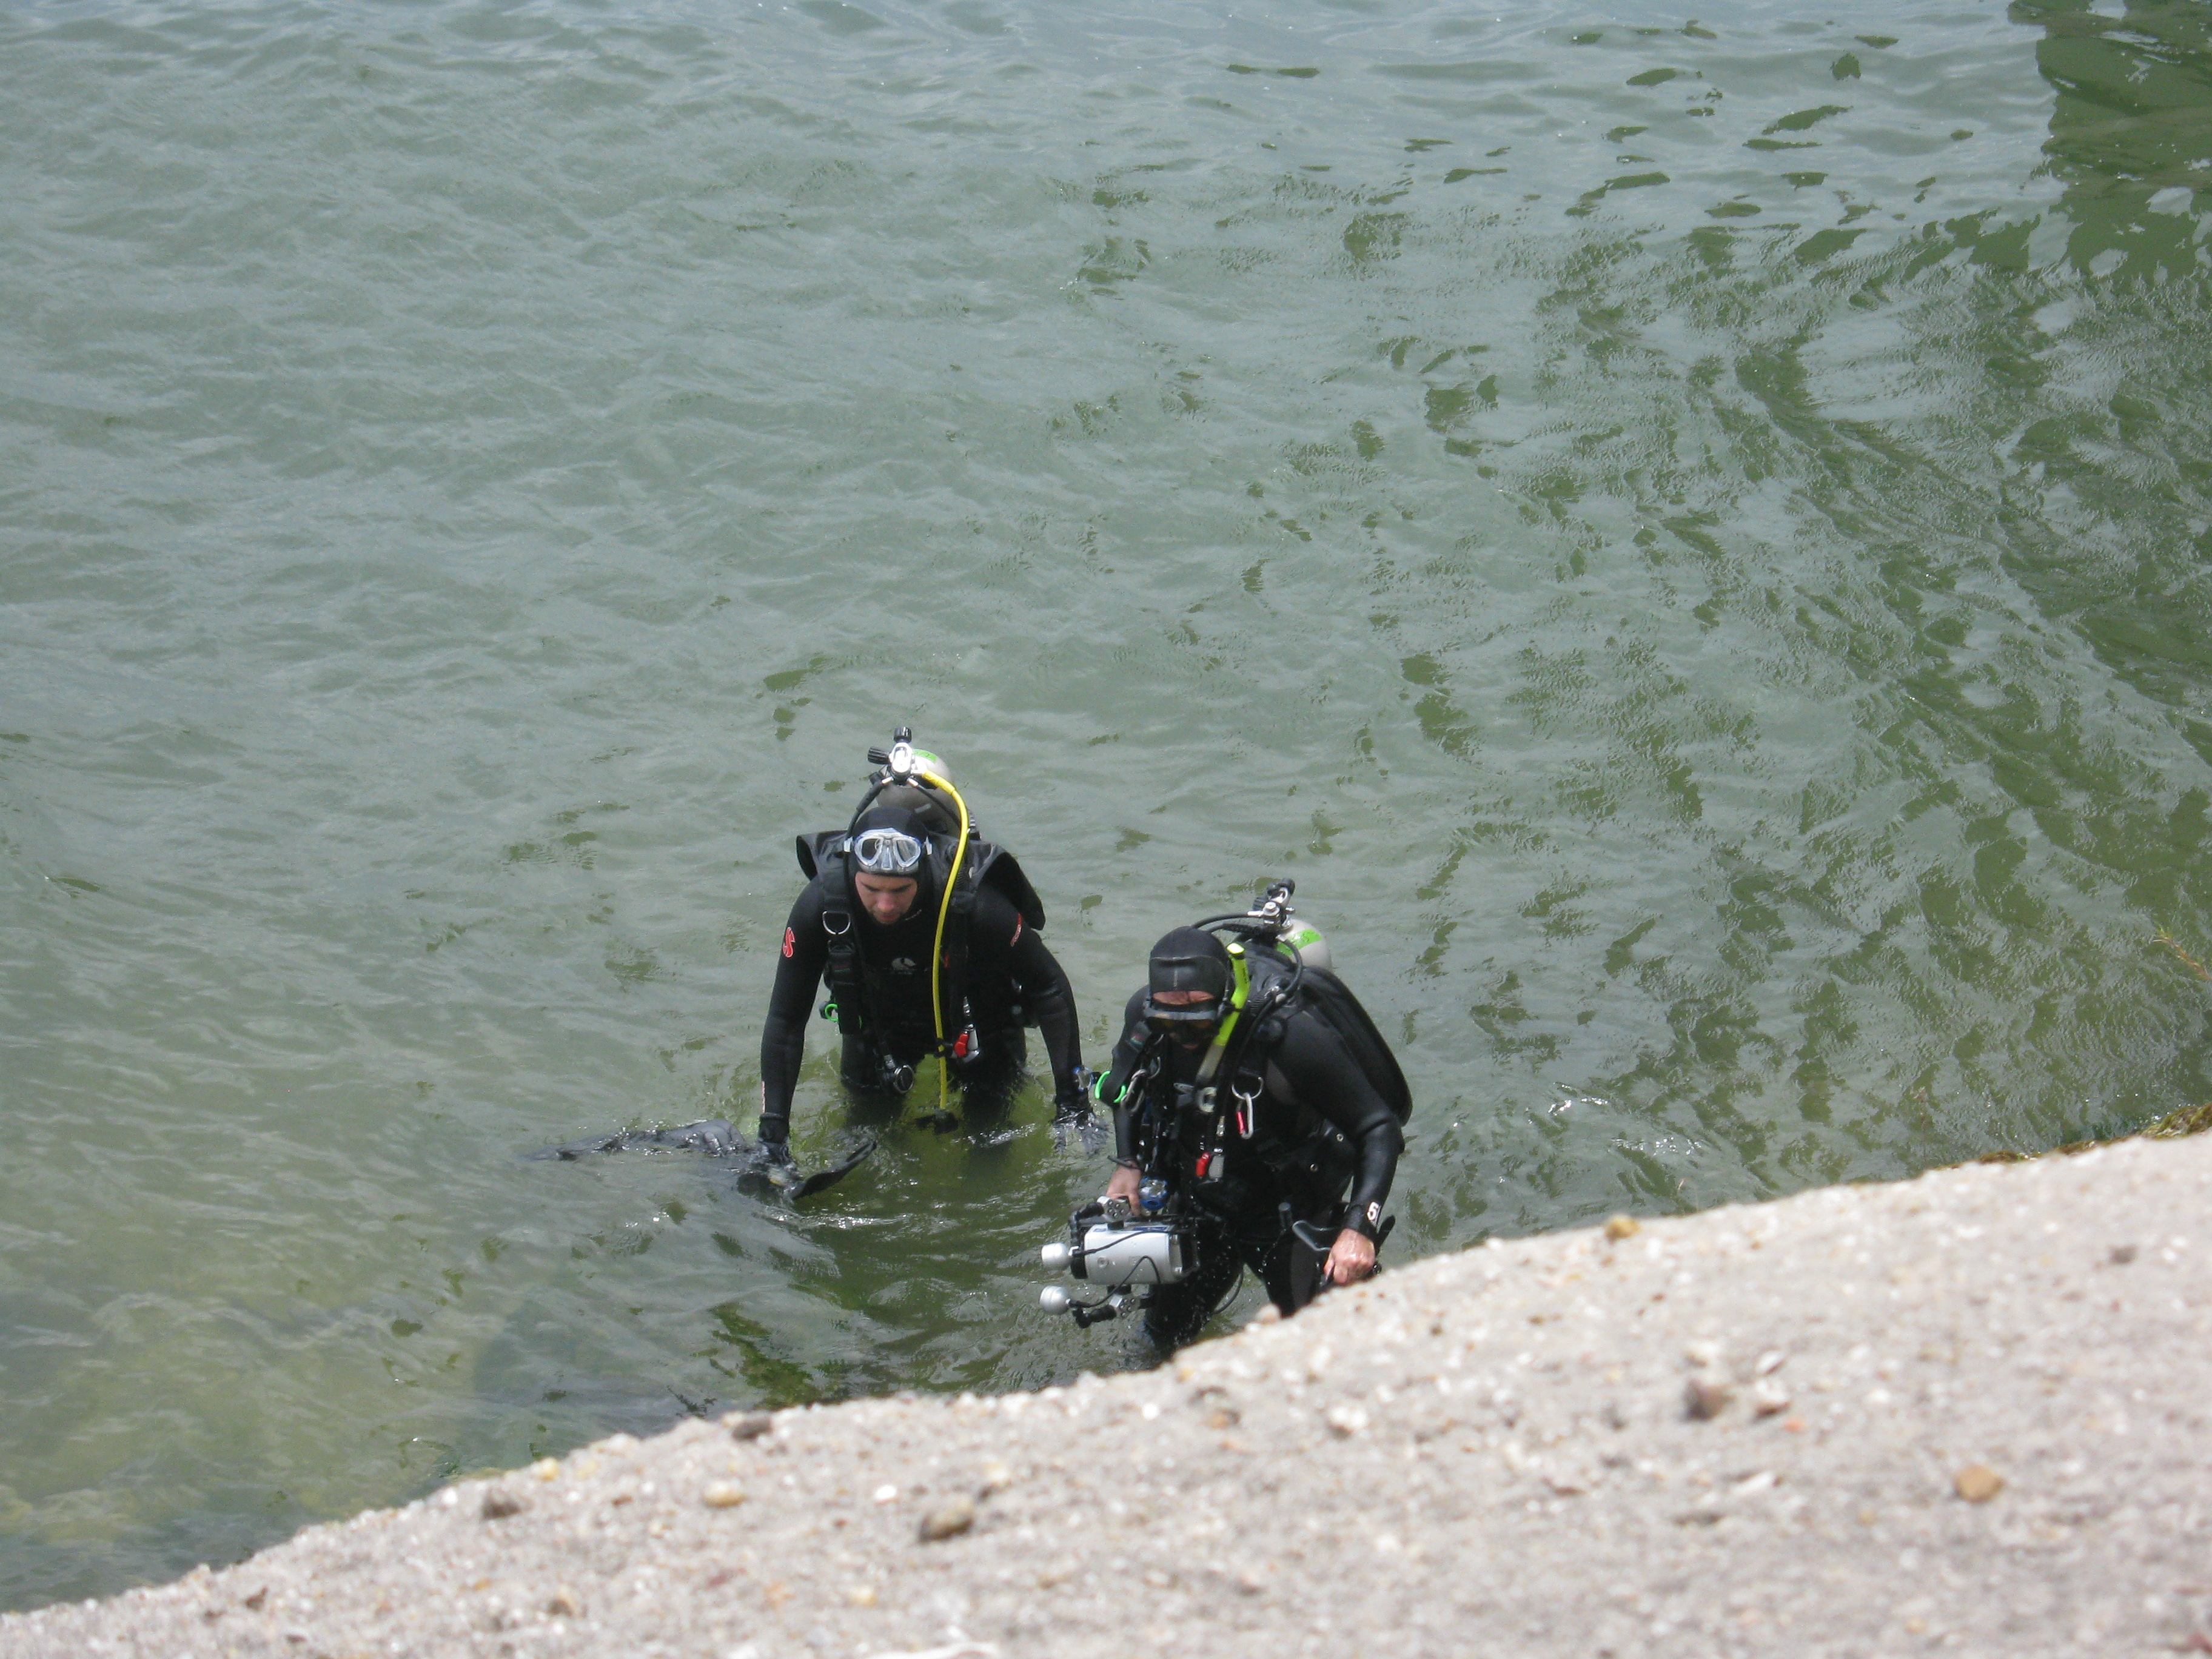 Two scuba divers stepping out of the water onto a rocky lake shore